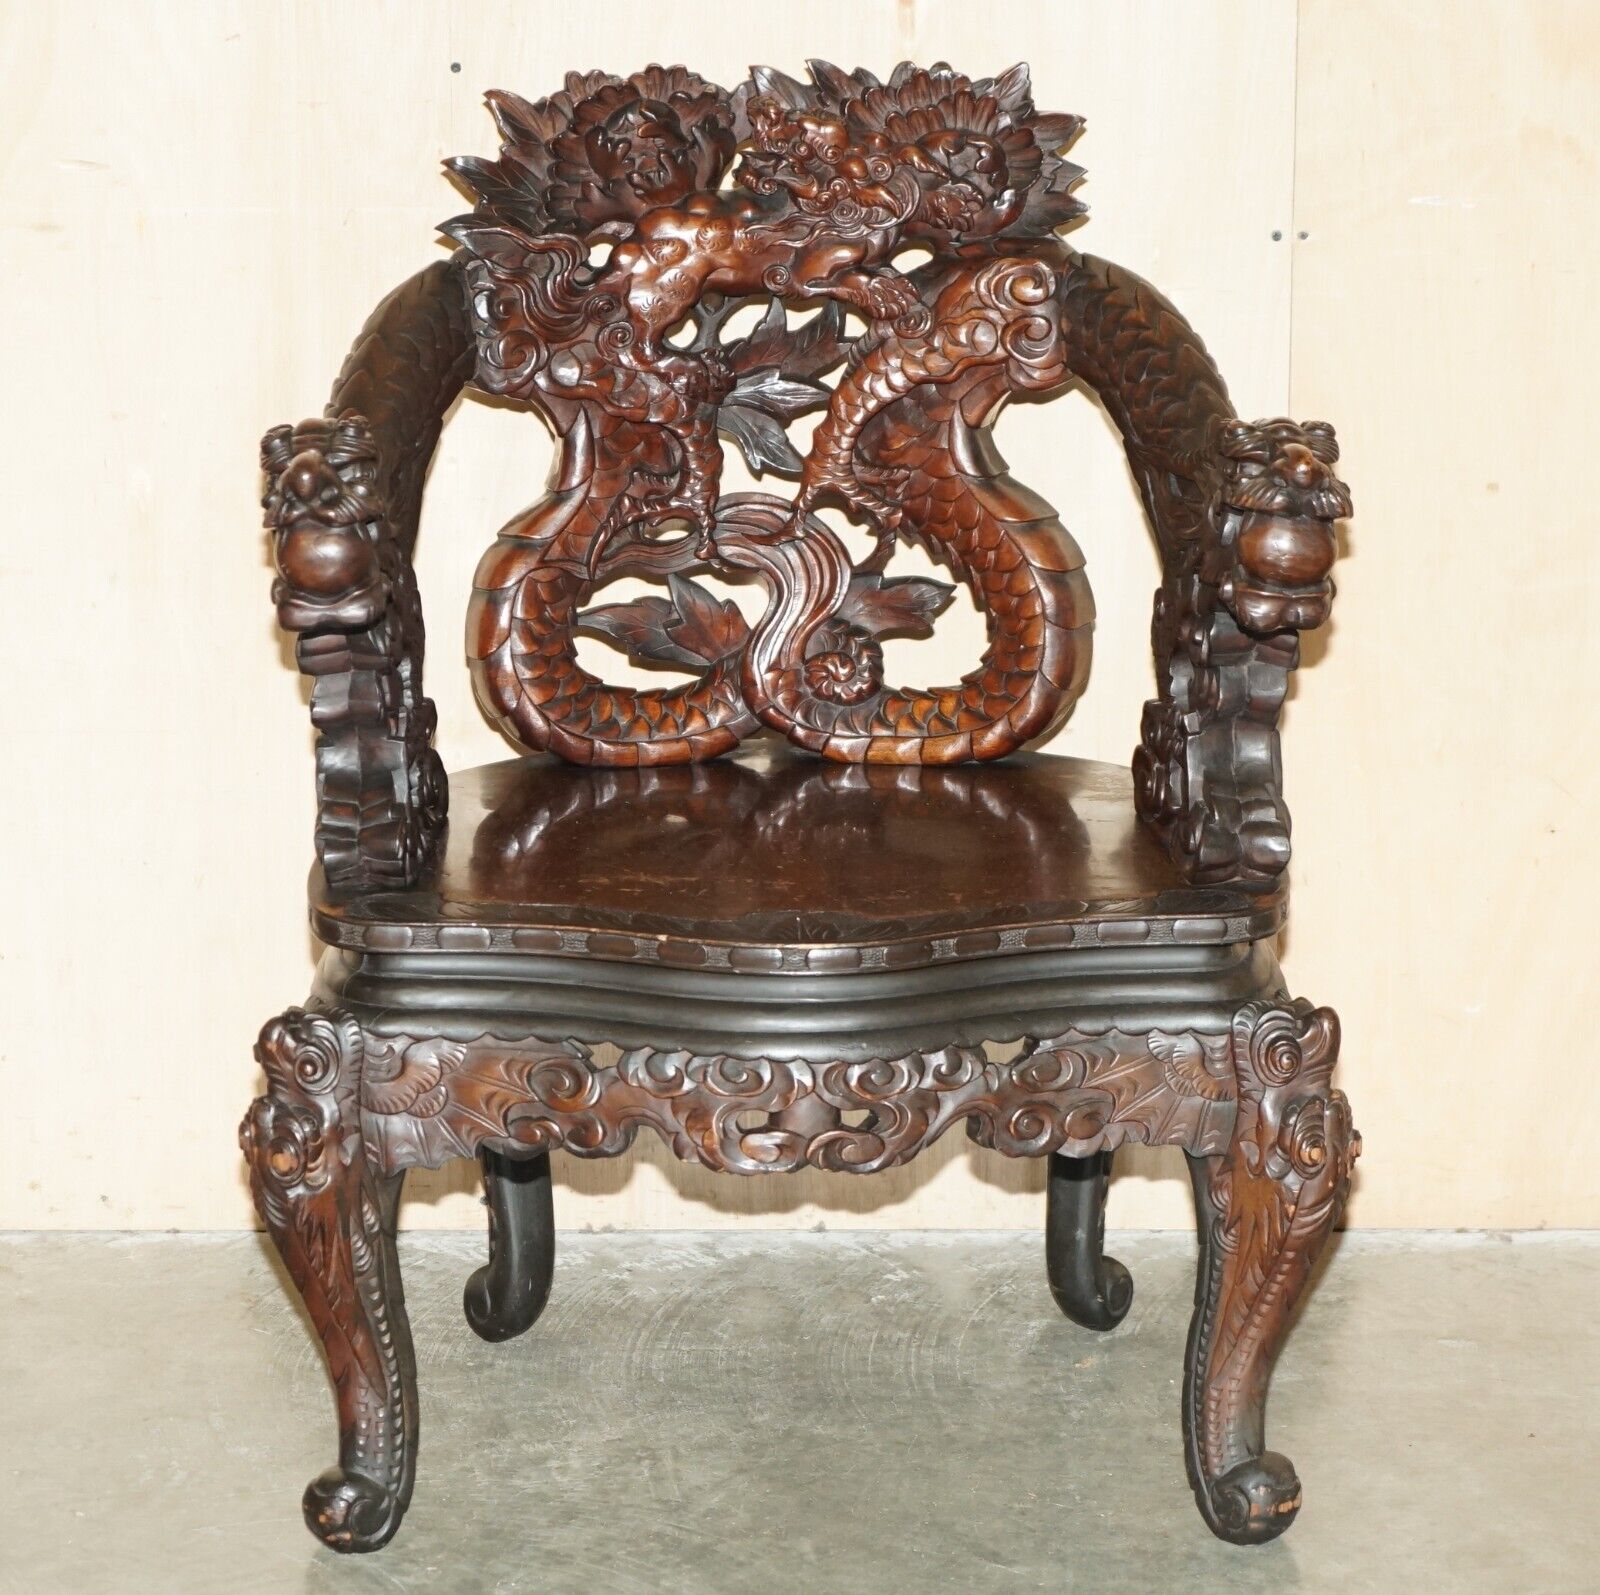 EXQUISITE CIRCA 1880 QING DYNASTY CARVED ROSEWOOD CHINESE DRAGON ARMCHAIR